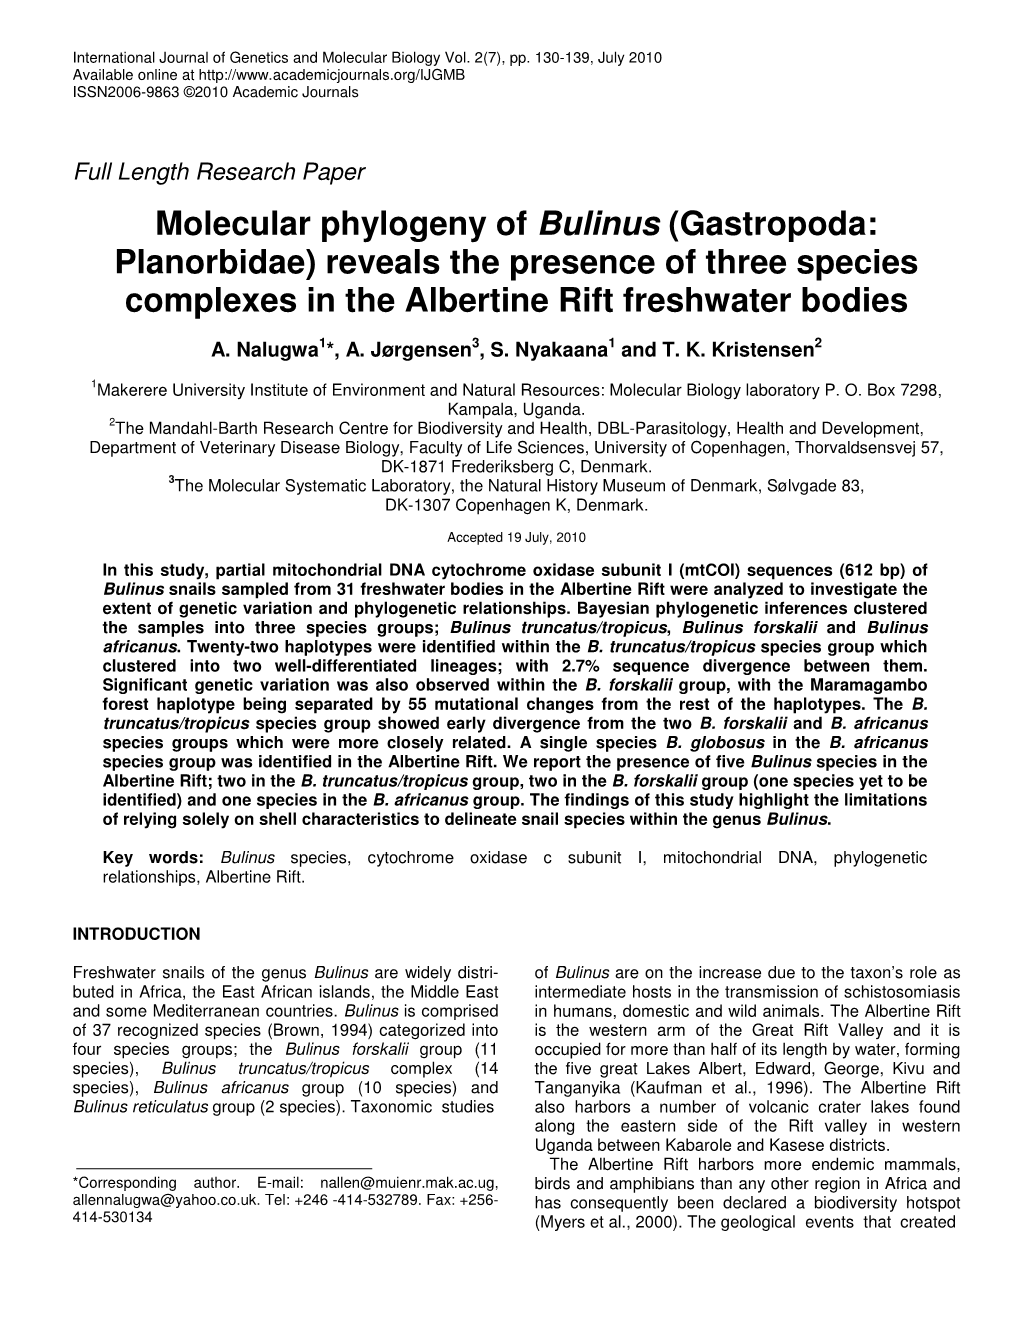 Molecular Phylogeny of Bulinus (Gastropoda: Planorbidae) Reveals the Presence of Three Species Complexes in the Albertine Rift Freshwater Bodies